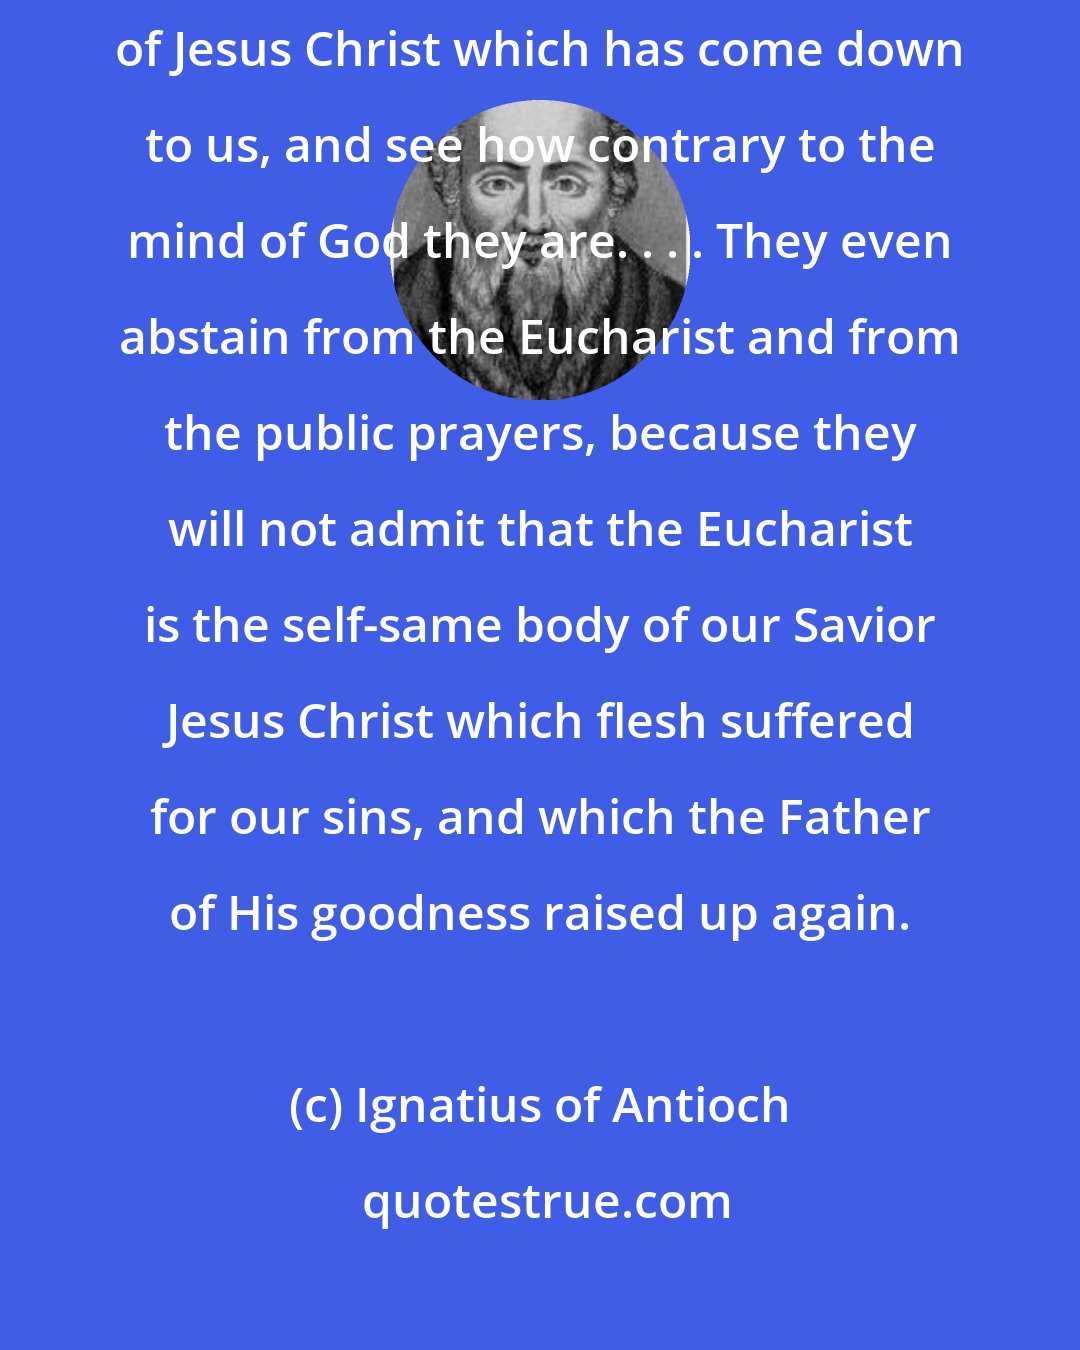 Ignatius of Antioch: But look at the men who have those perverted notions about the grace of Jesus Christ which has come down to us, and see how contrary to the mind of God they are. . . . They even abstain from the Eucharist and from the public prayers, because they will not admit that the Eucharist is the self-same body of our Savior Jesus Christ which flesh suffered for our sins, and which the Father of His goodness raised up again.